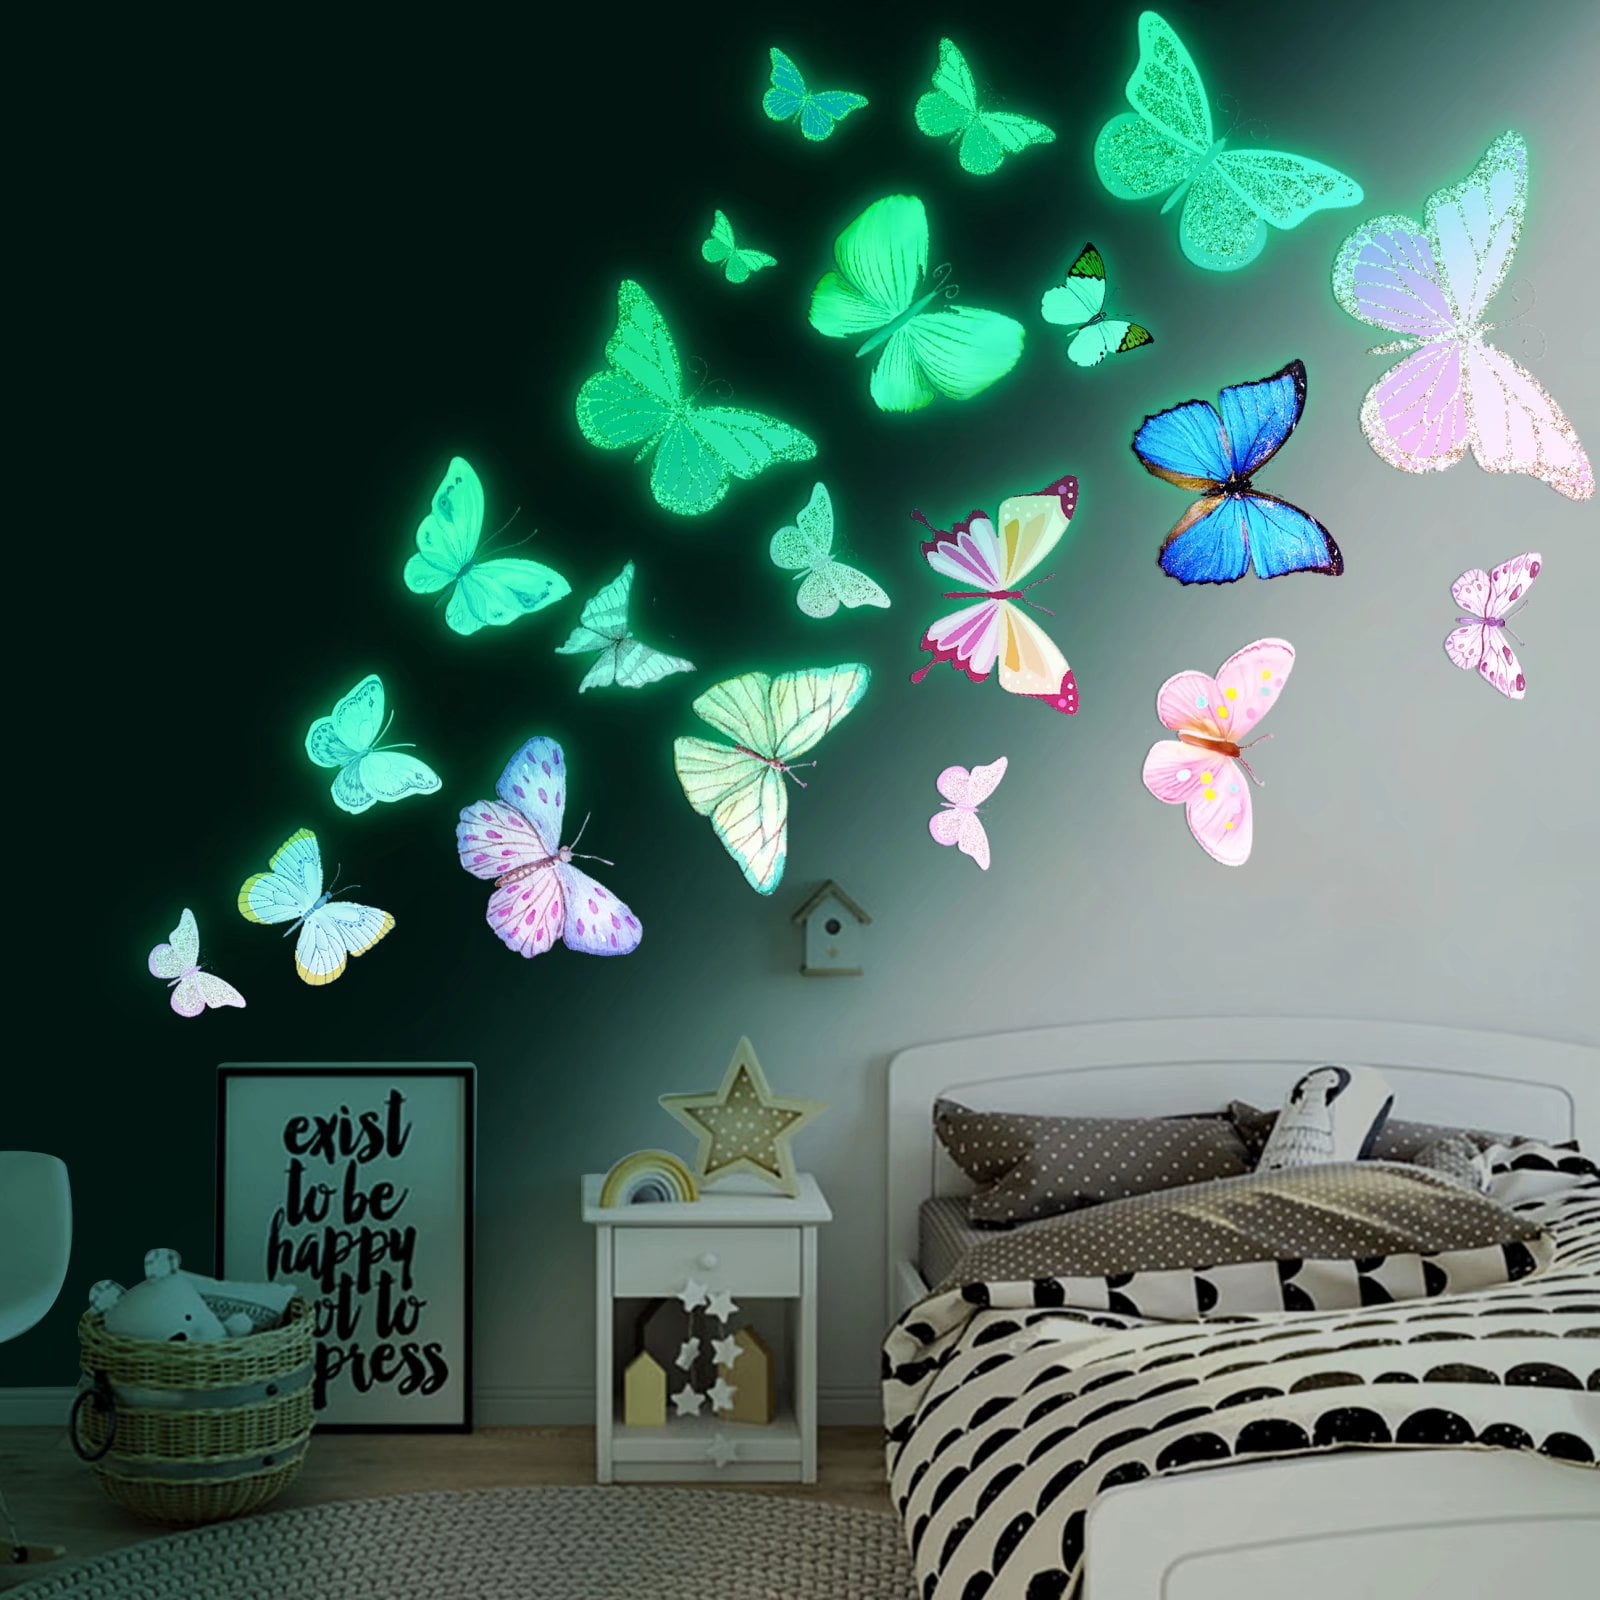 Travelwant Giant Butterfly Wall Stickers Decor,3D Large Butterflies Wall Magnetism Decals Removable DIY Home Art Decorations, Green